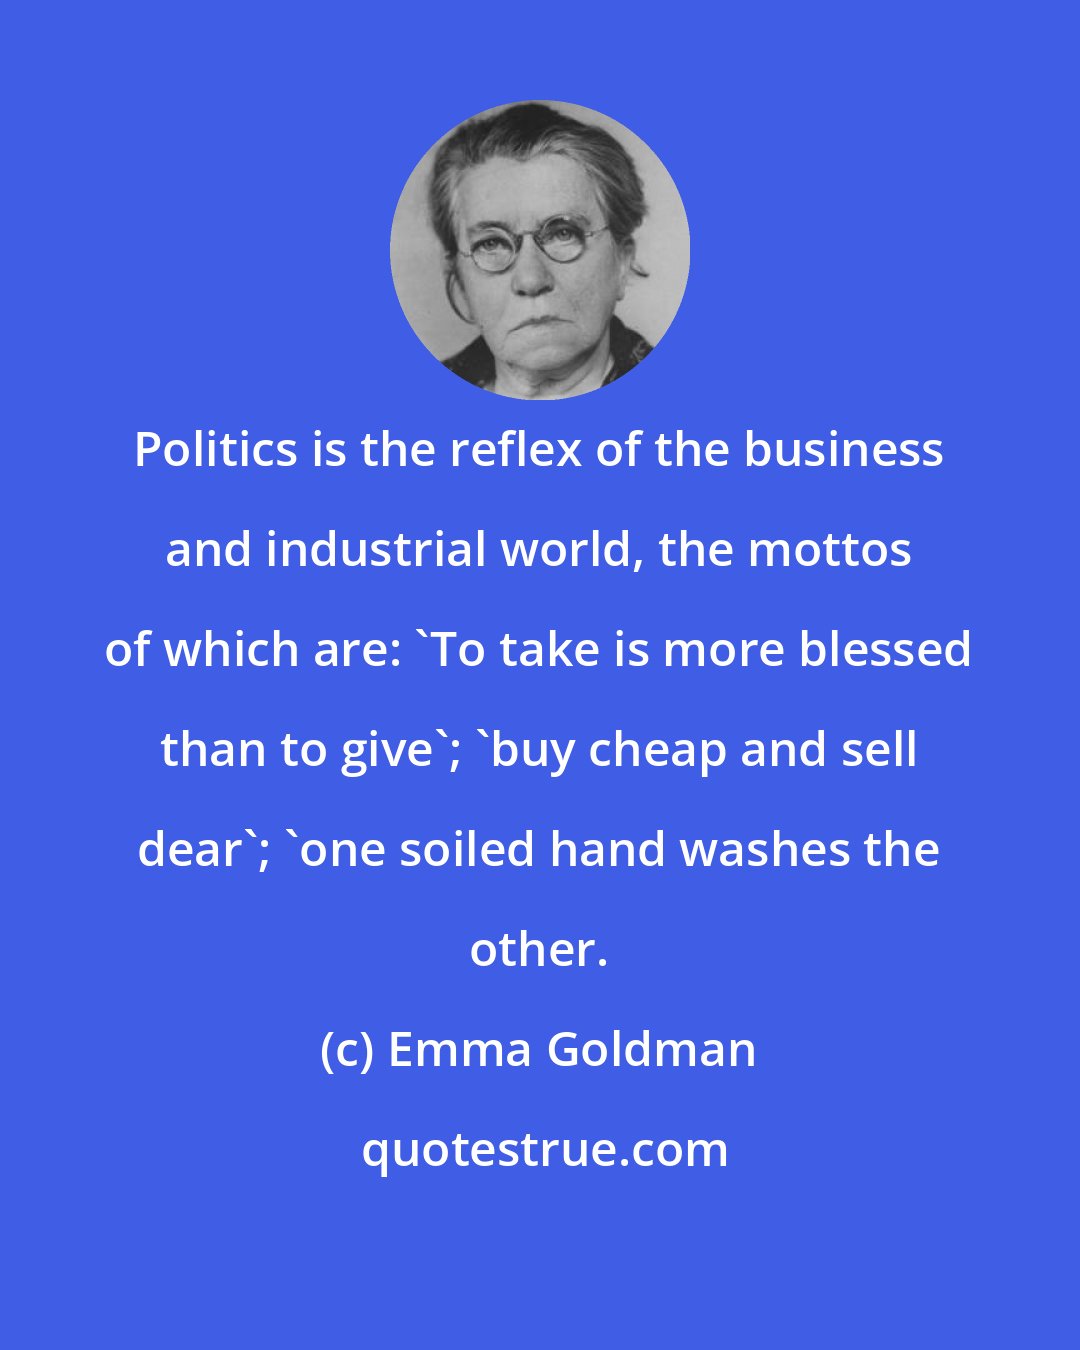 Emma Goldman: Politics is the reflex of the business and industrial world, the mottos of which are: 'To take is more blessed than to give'; 'buy cheap and sell dear'; 'one soiled hand washes the other.